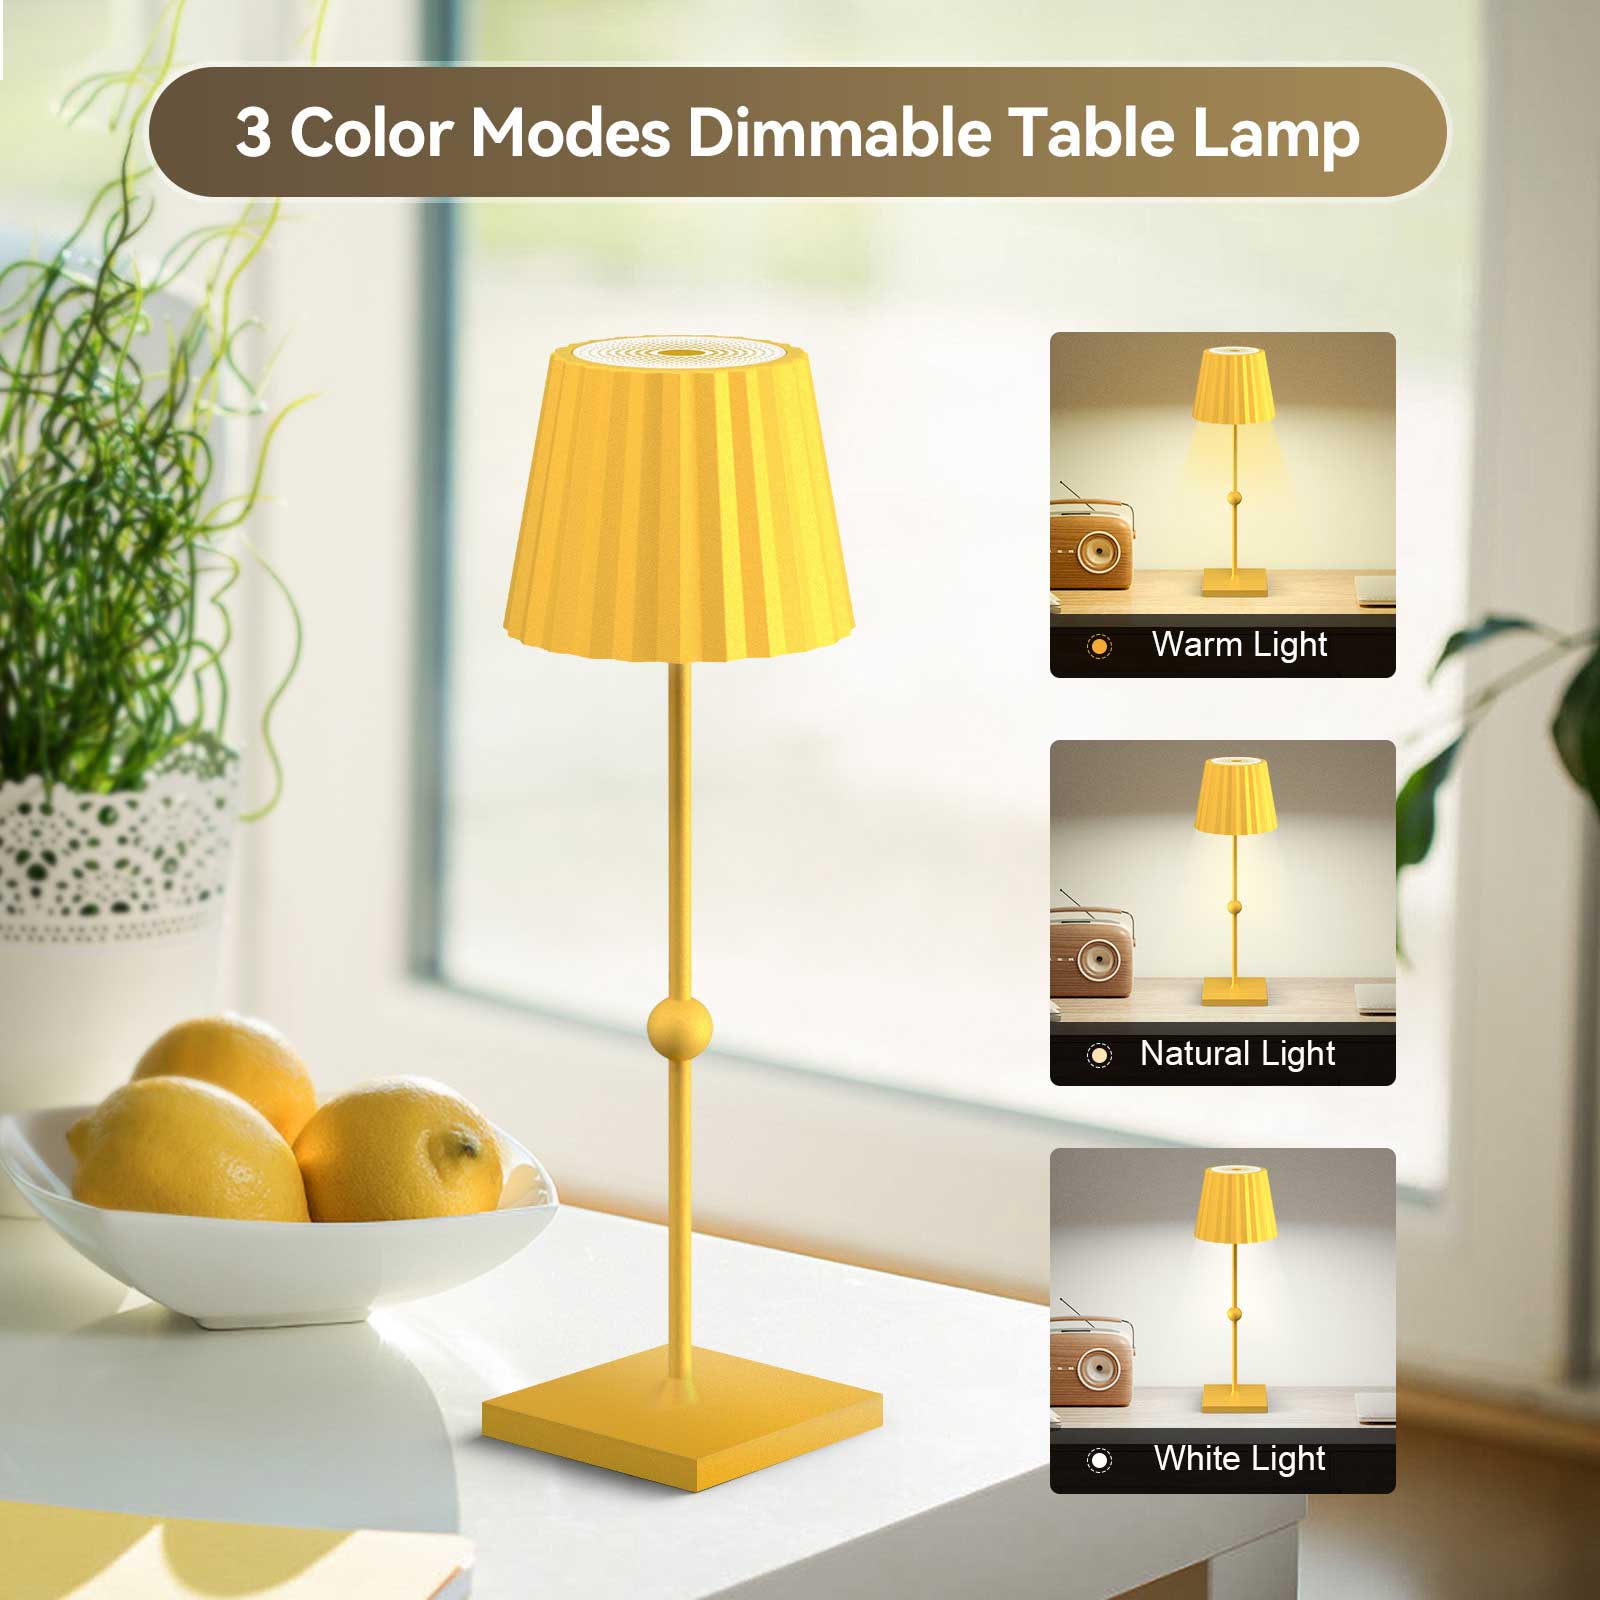 Huiveoo 3 Color Modes Dimmable Table Lamp Silva-B Gold